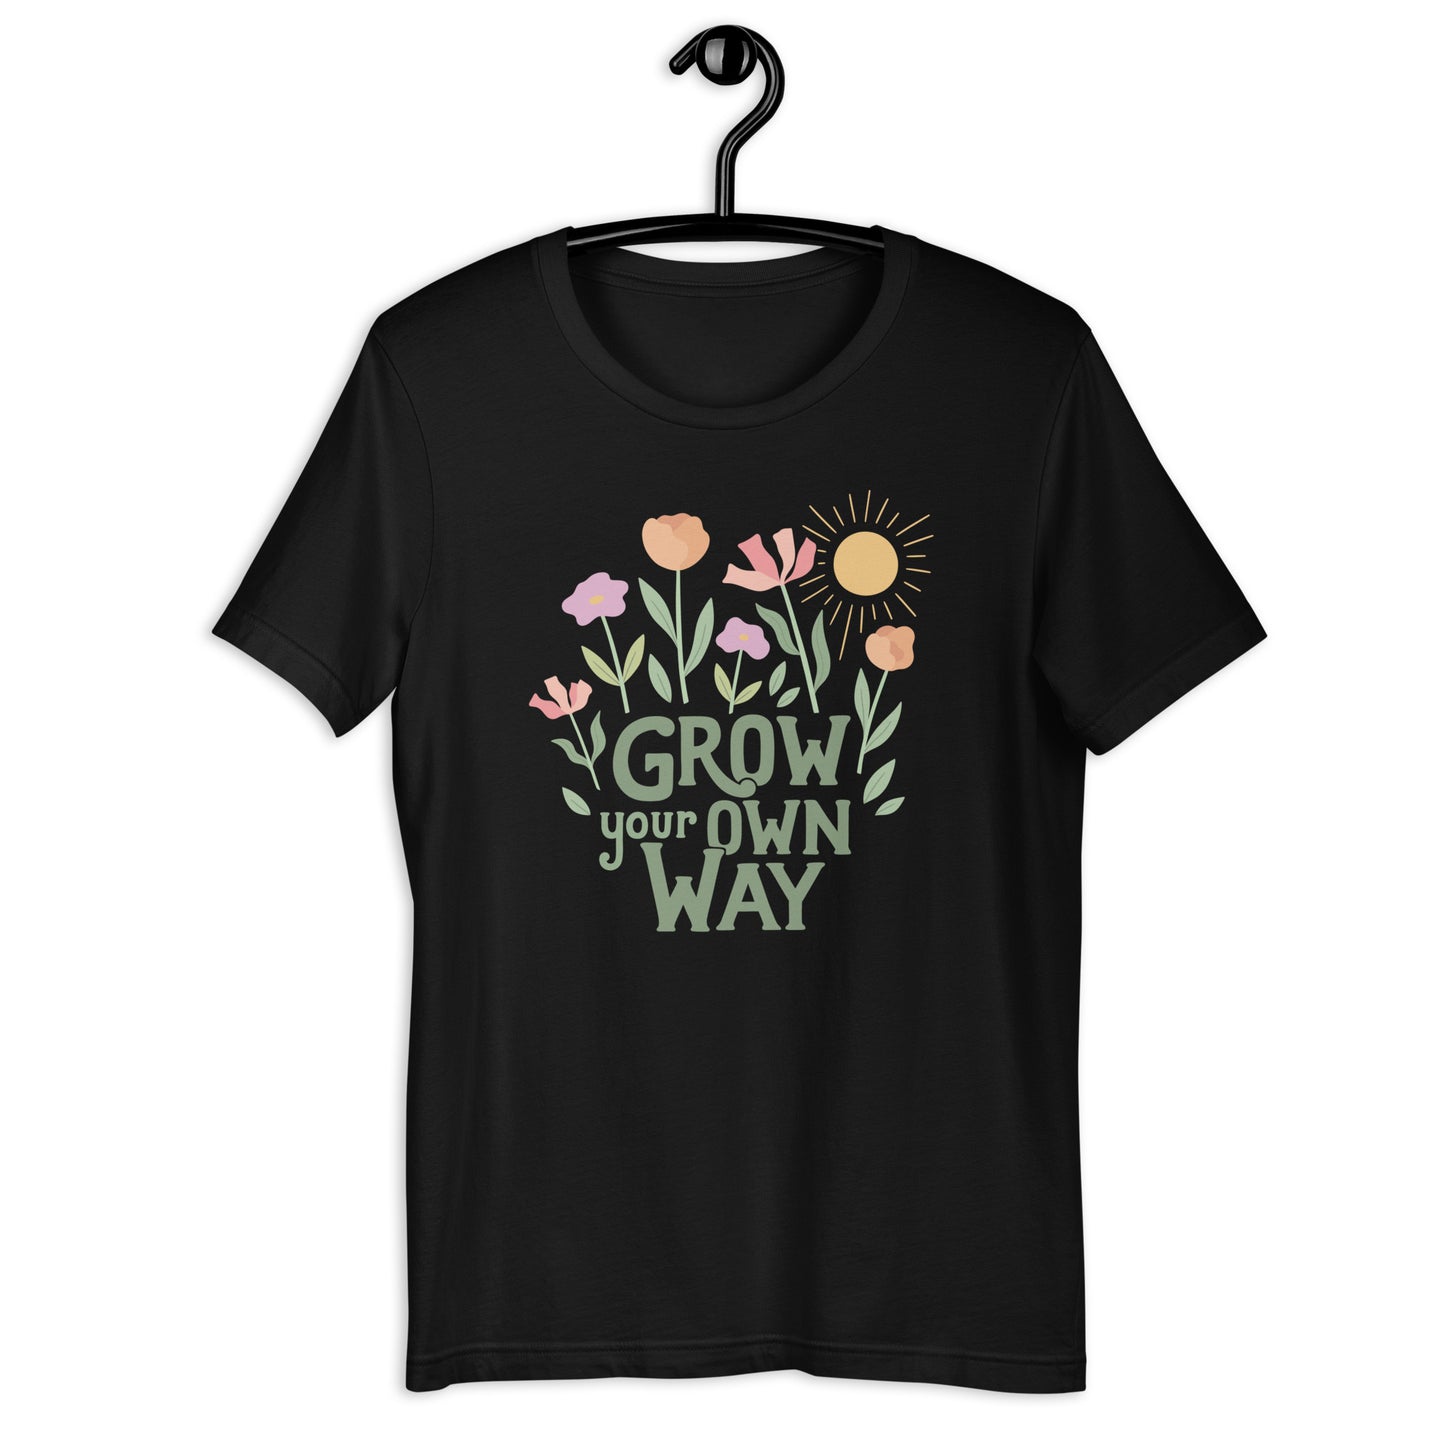 Grow Your Own Way — Adult Unisex Tee